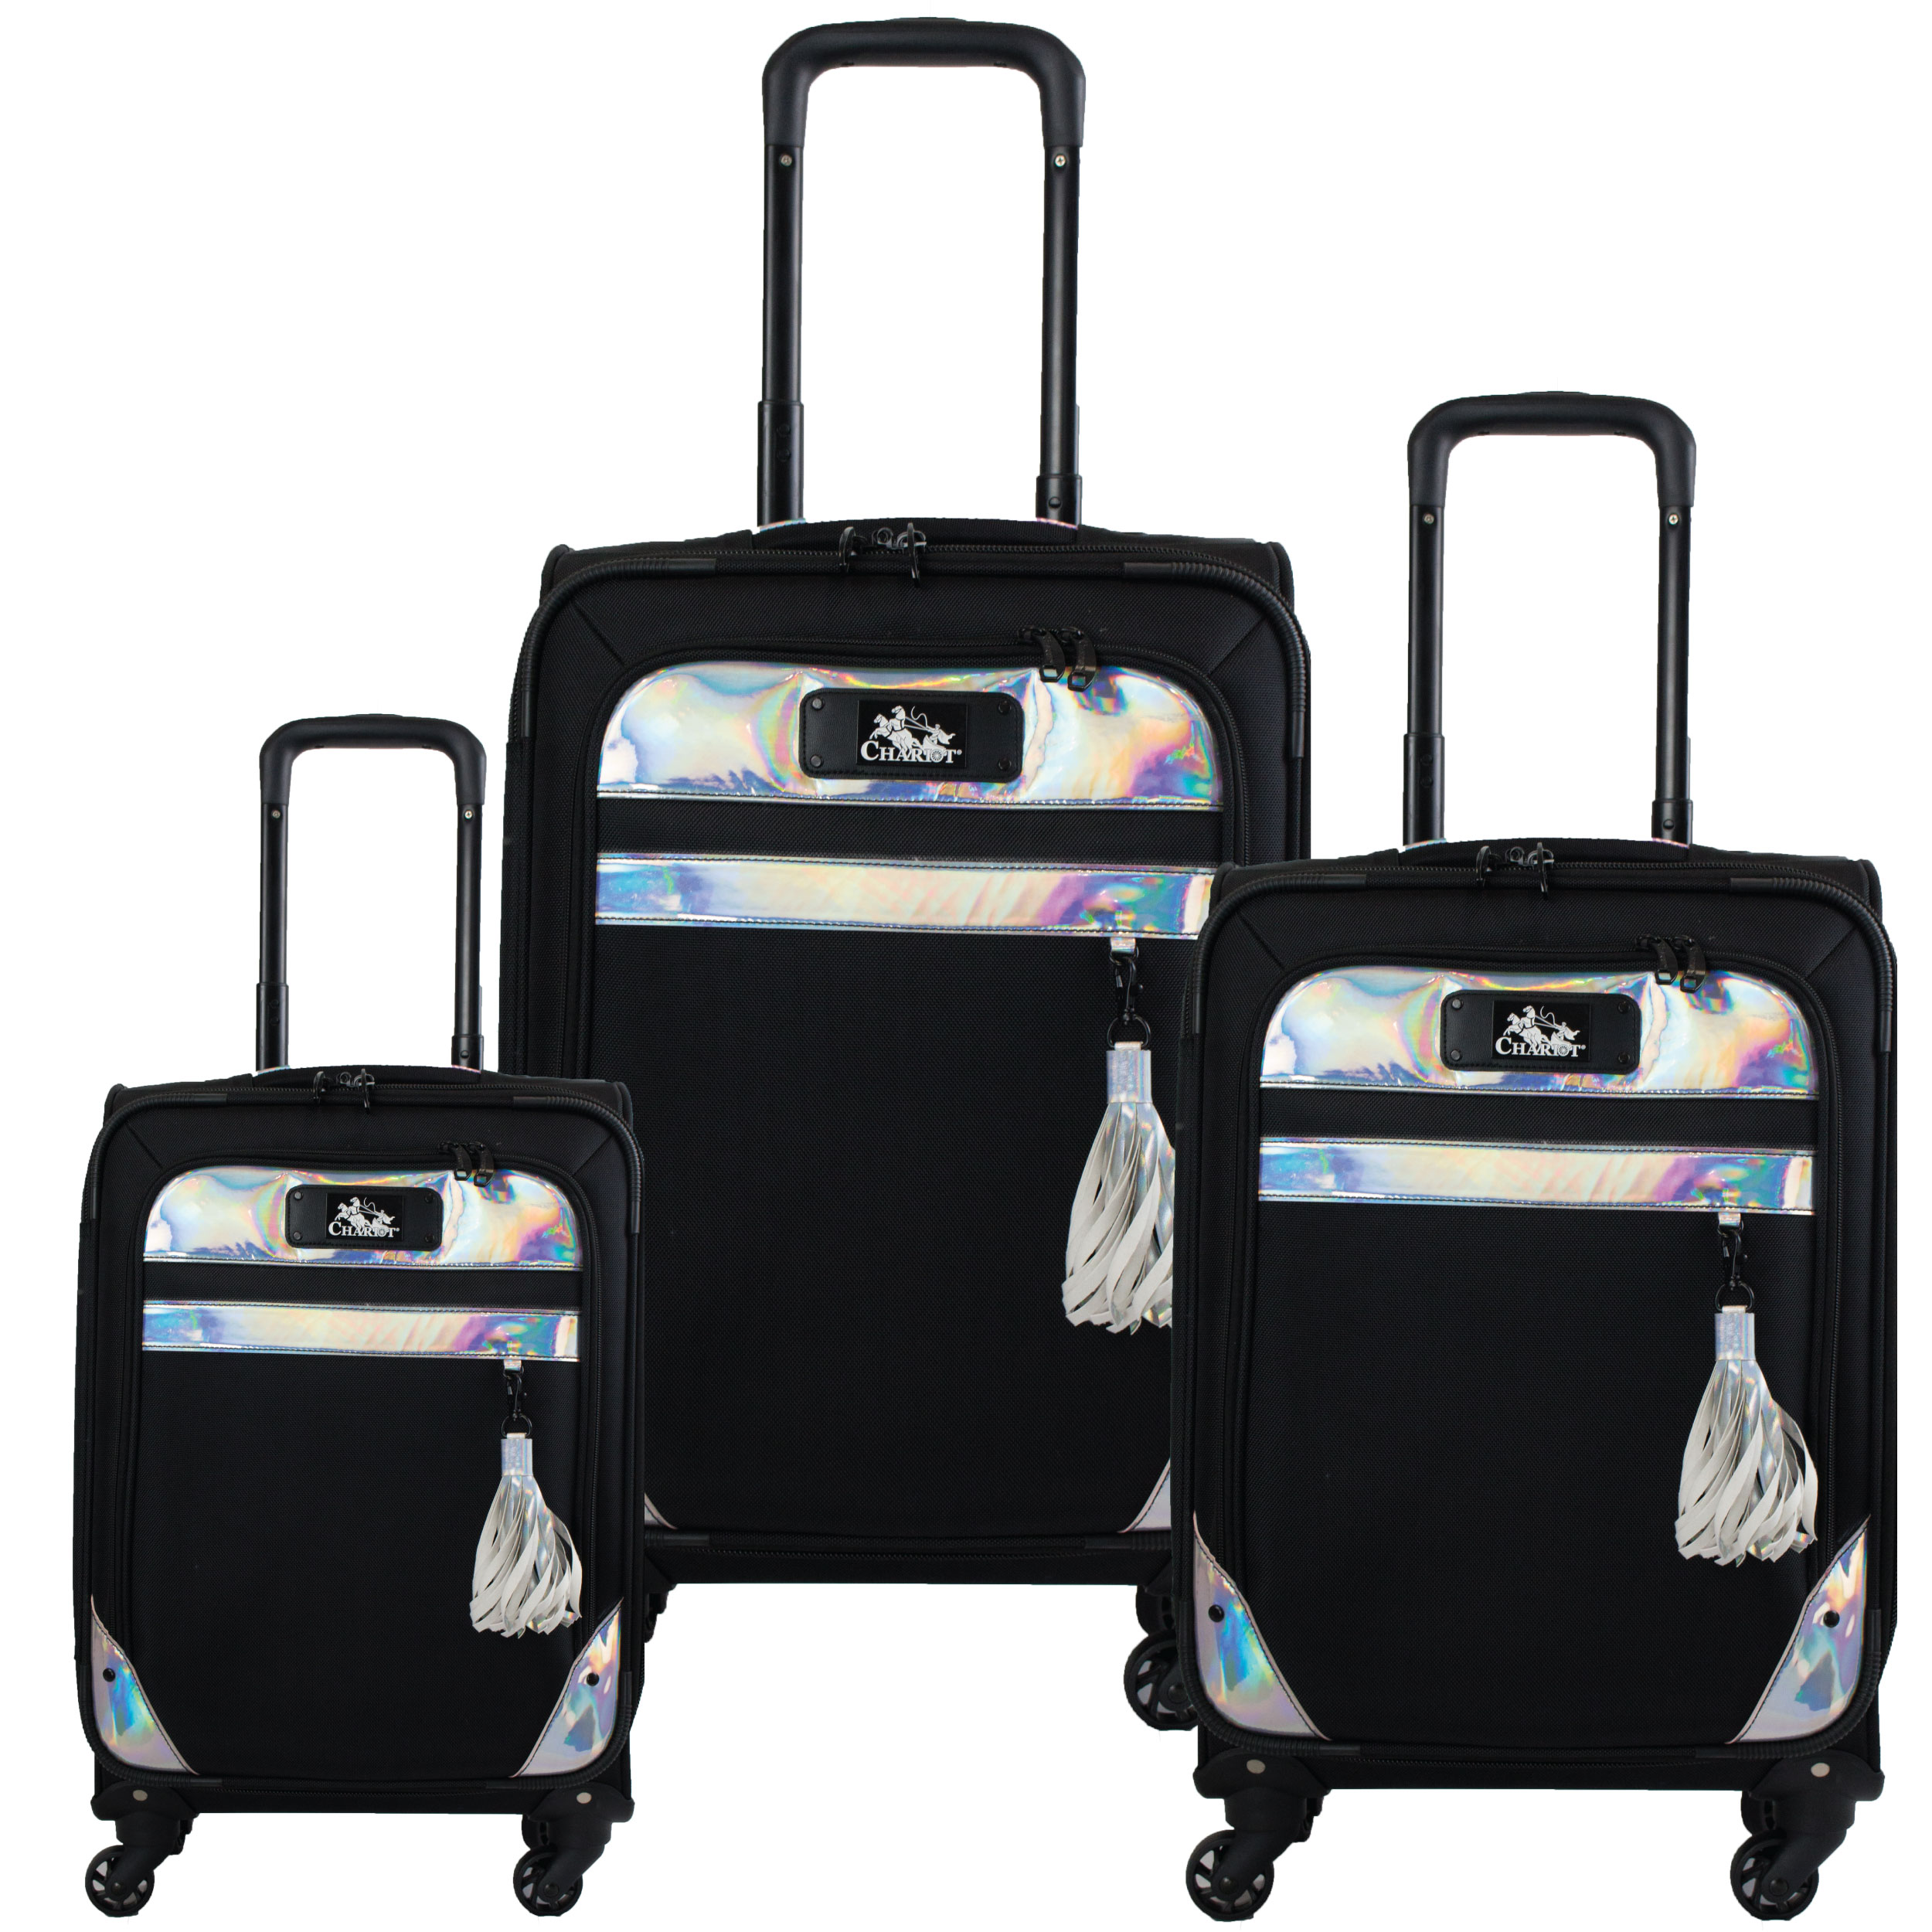 Navy/Grey Chariot Madrid 3 Piece Expandable Spinner Luggage Set 